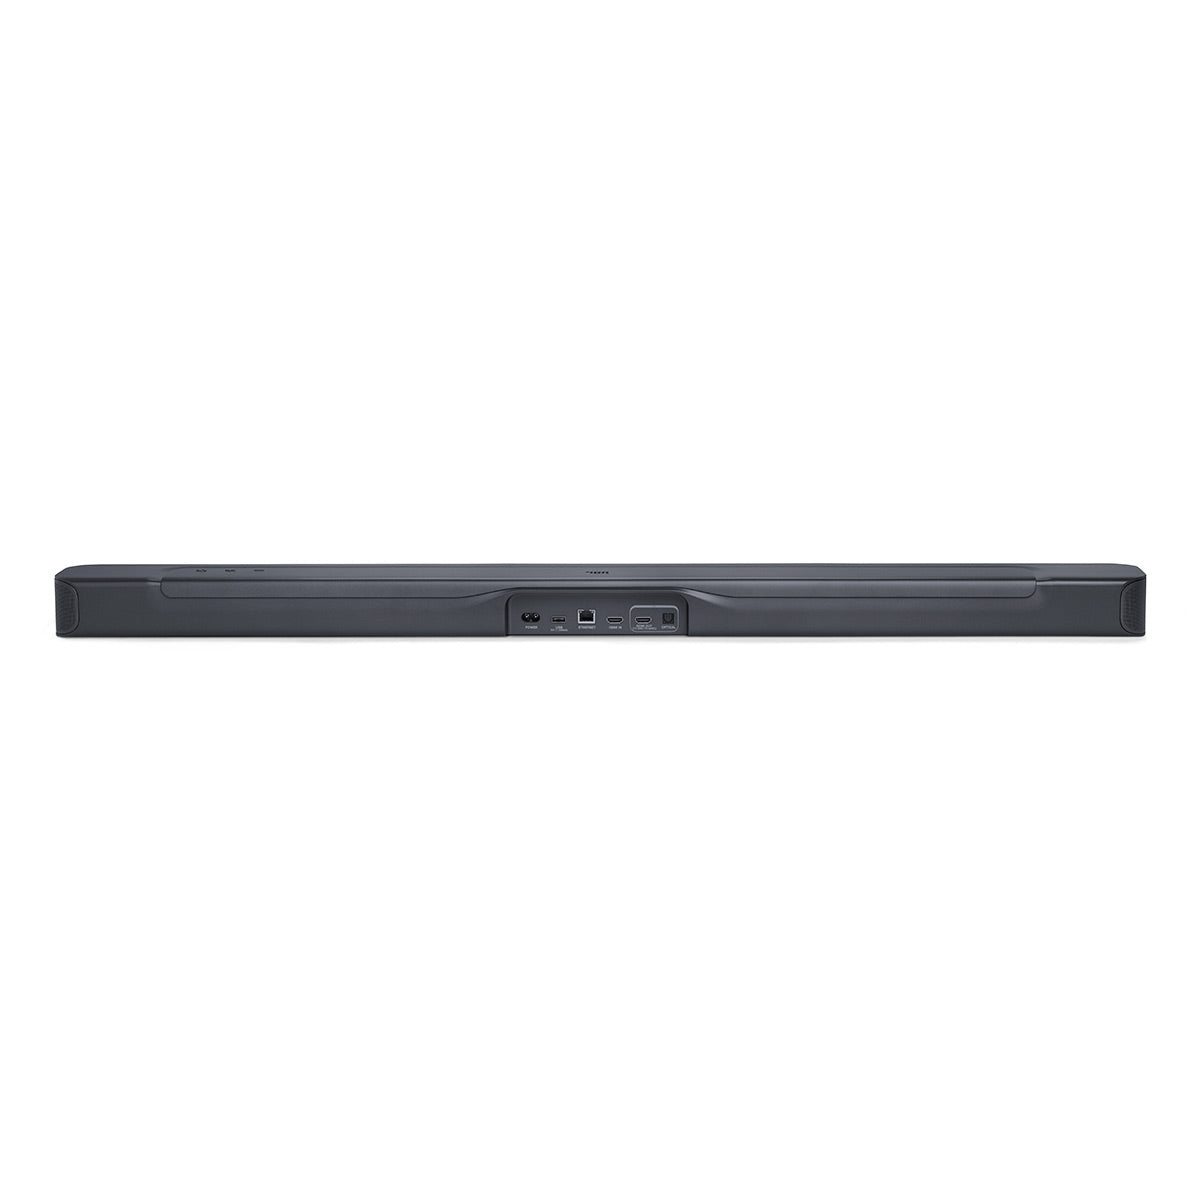 JBL Bar 500 Pro Dolby Atmos® Soundbar with Wireless Subwoofer, 5.1 Channel,  3D Surround, Multibeam™, HDMI eARC with 4K Dolby Vision Pass-Through, One  App, Bluetooth, Wi-Fi & Optical Input (590W) Price: Buy